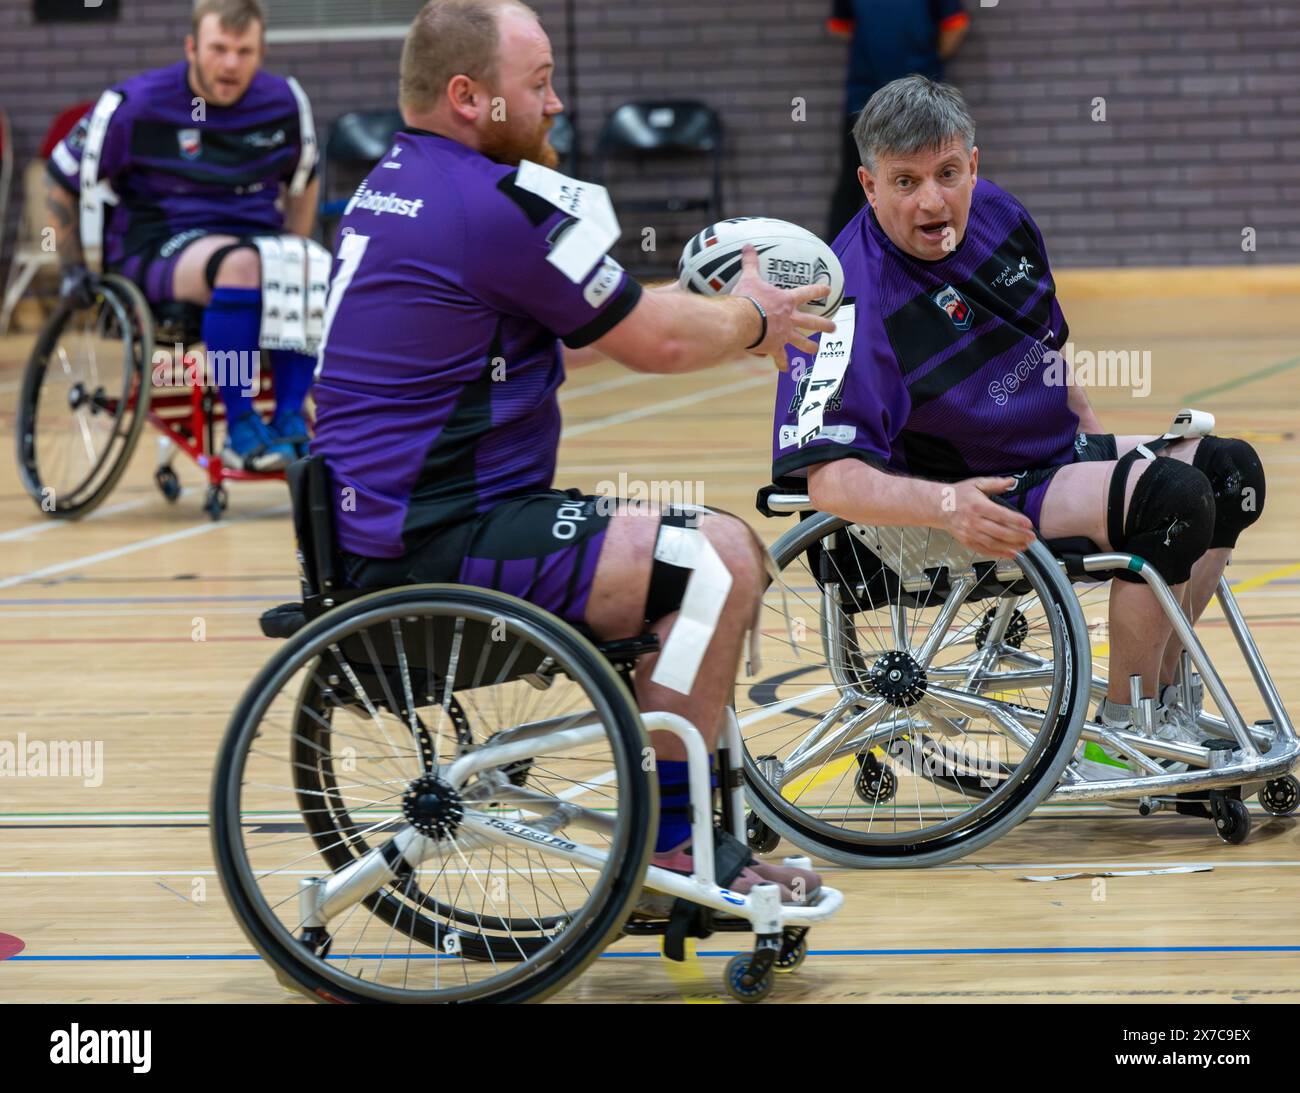 Brentwood Essex 19. Mai 2024 Rollstuhl Rugby League: Brentwood Aels (Stripped Shirt, gelbe Tags) vs Team Colostomy UK (Purple Shirts, weiße Tags) im Brentwood Centre, Brentwood Essex UK Credit: Ian Davidson/Alamy Live News Stockfoto